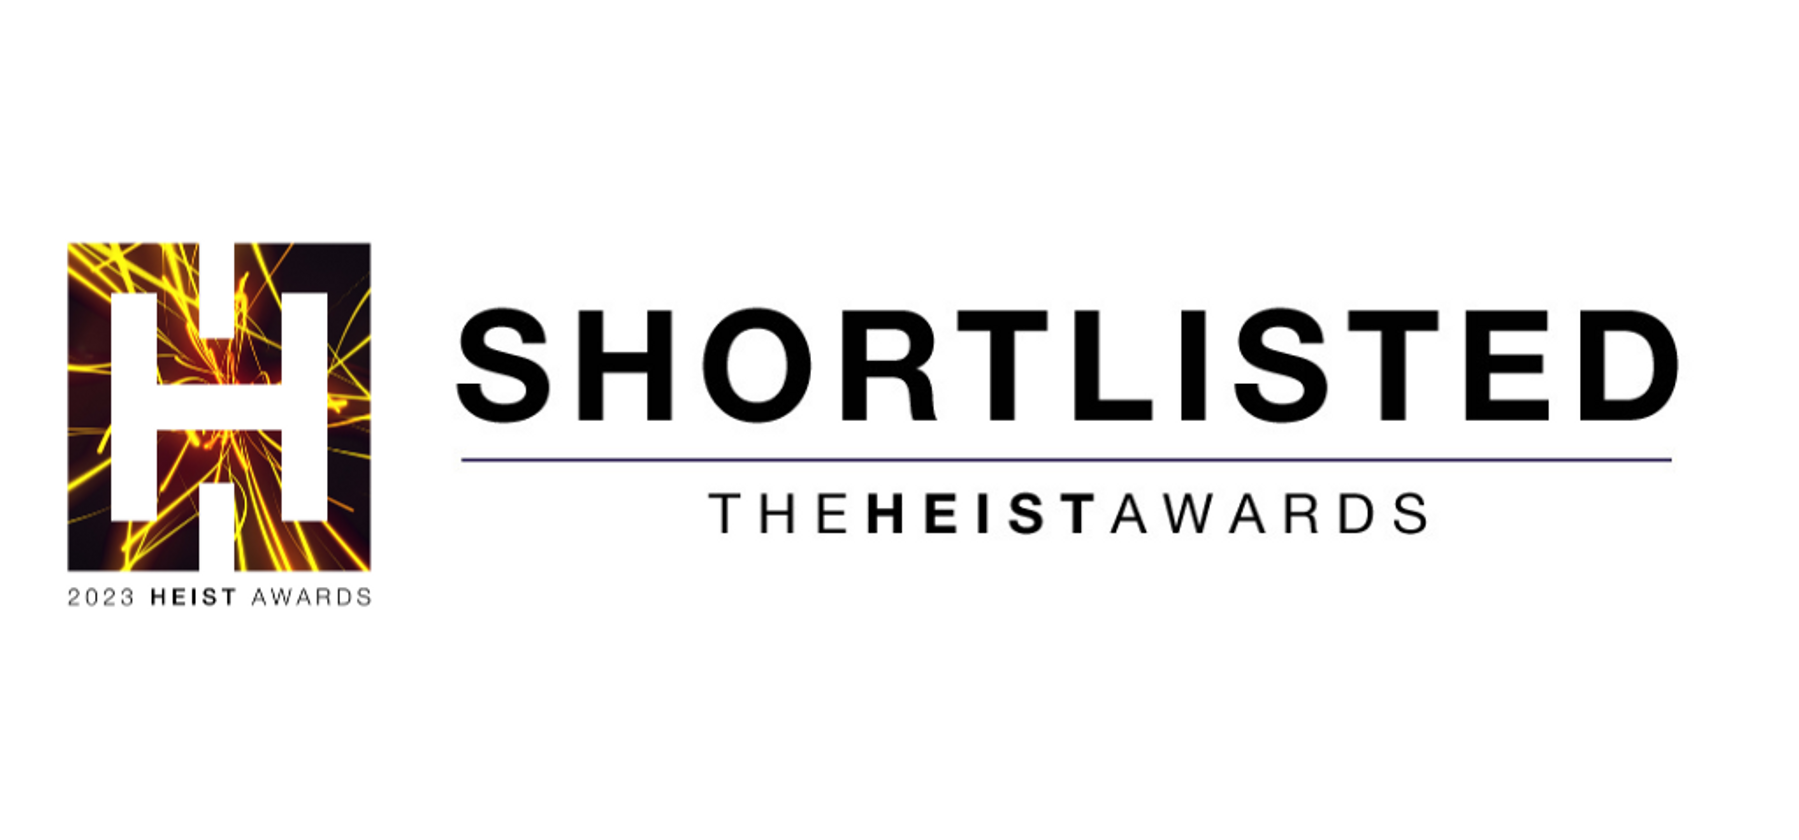 psLondon's higher education clients shortlisted for the HEIST Awards 2023